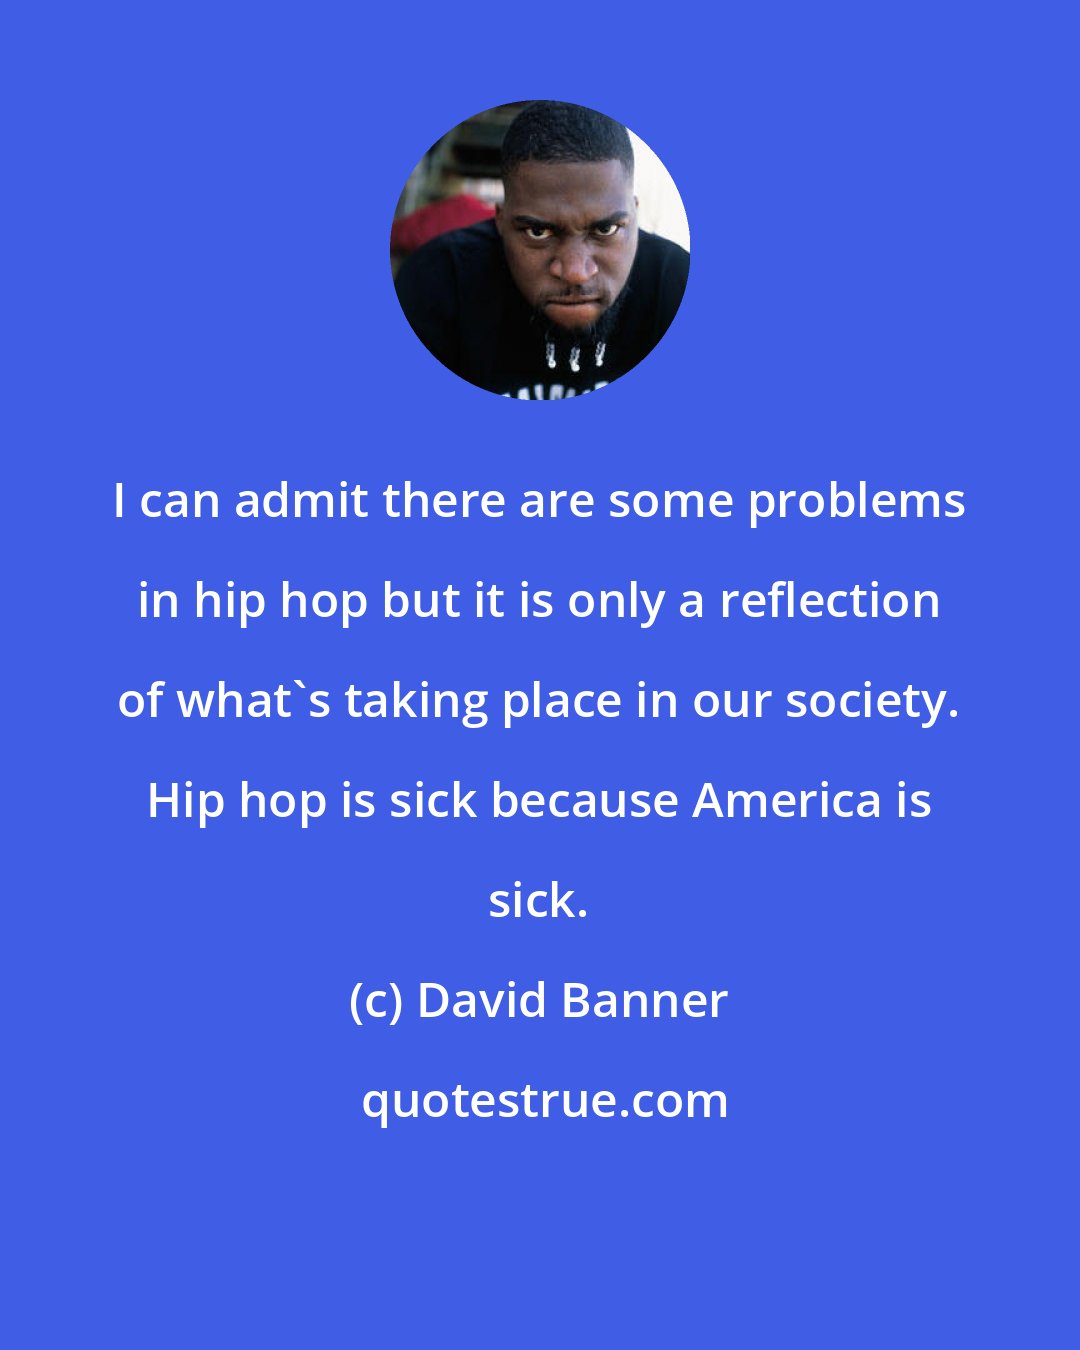 David Banner: I can admit there are some problems in hip hop but it is only a reflection of what's taking place in our society. Hip hop is sick because America is sick.